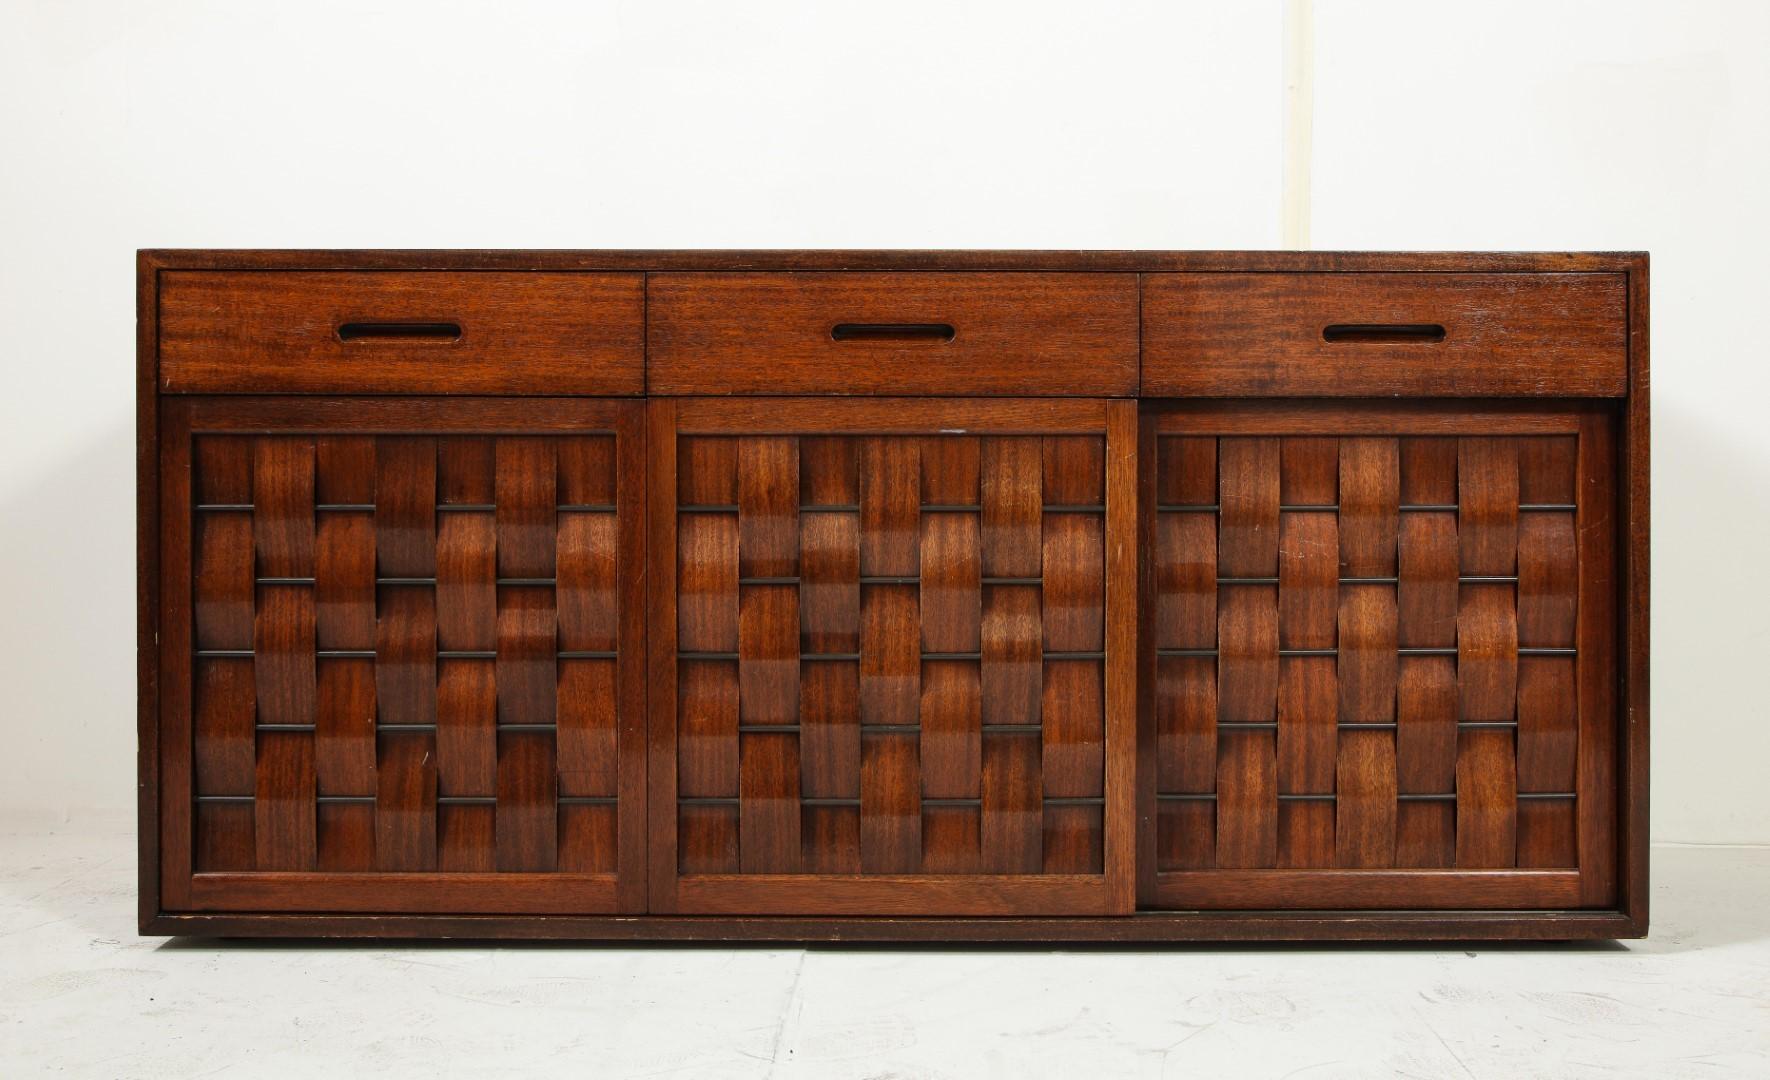 Two signed Edward Wormley for Dunbar ebonized walnut woven front credenzas with brass fittings. One piece is a darker walnut than the other so they are not exactly matching in coloration. The two cabinets are the same dimensions; each have three